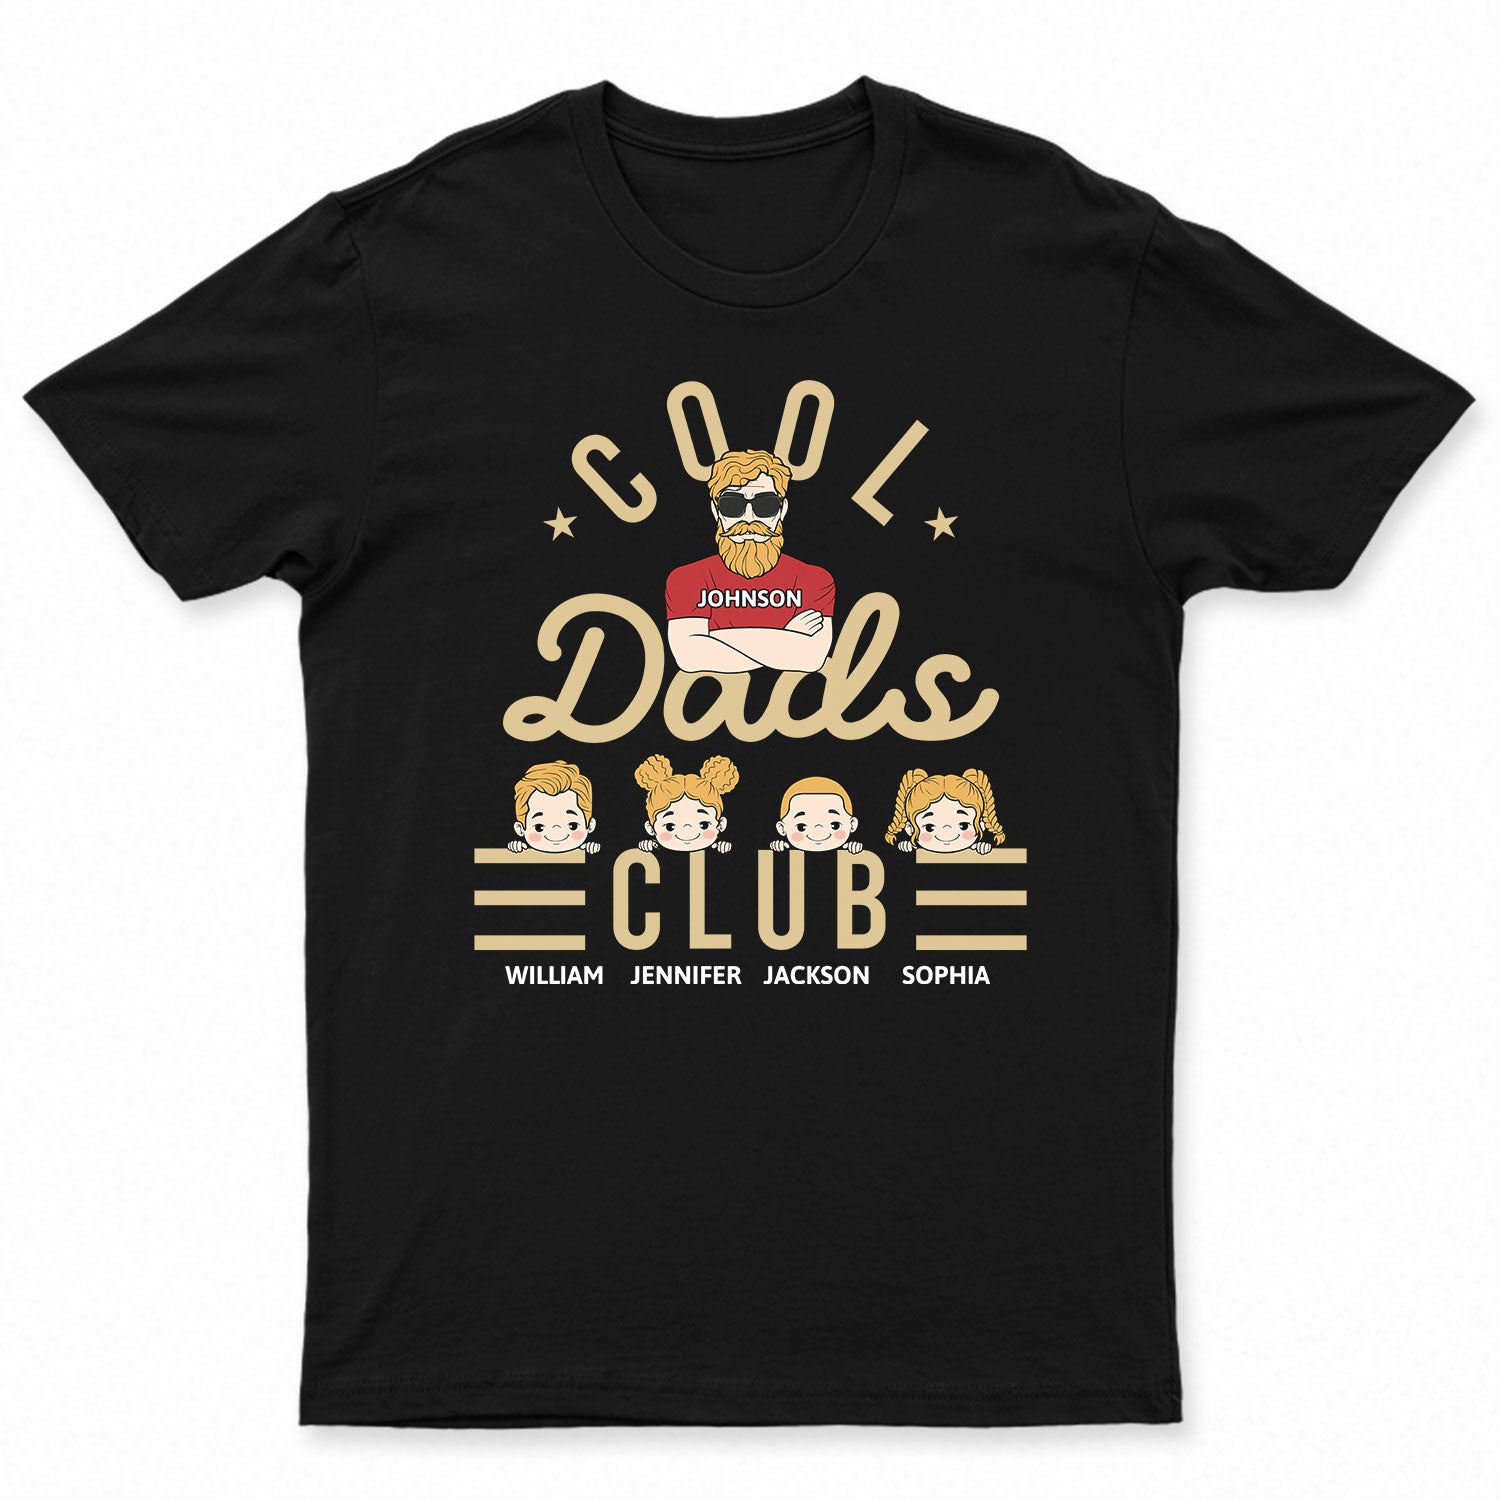 Cool Dads Club Kids - Personalized T Shirt